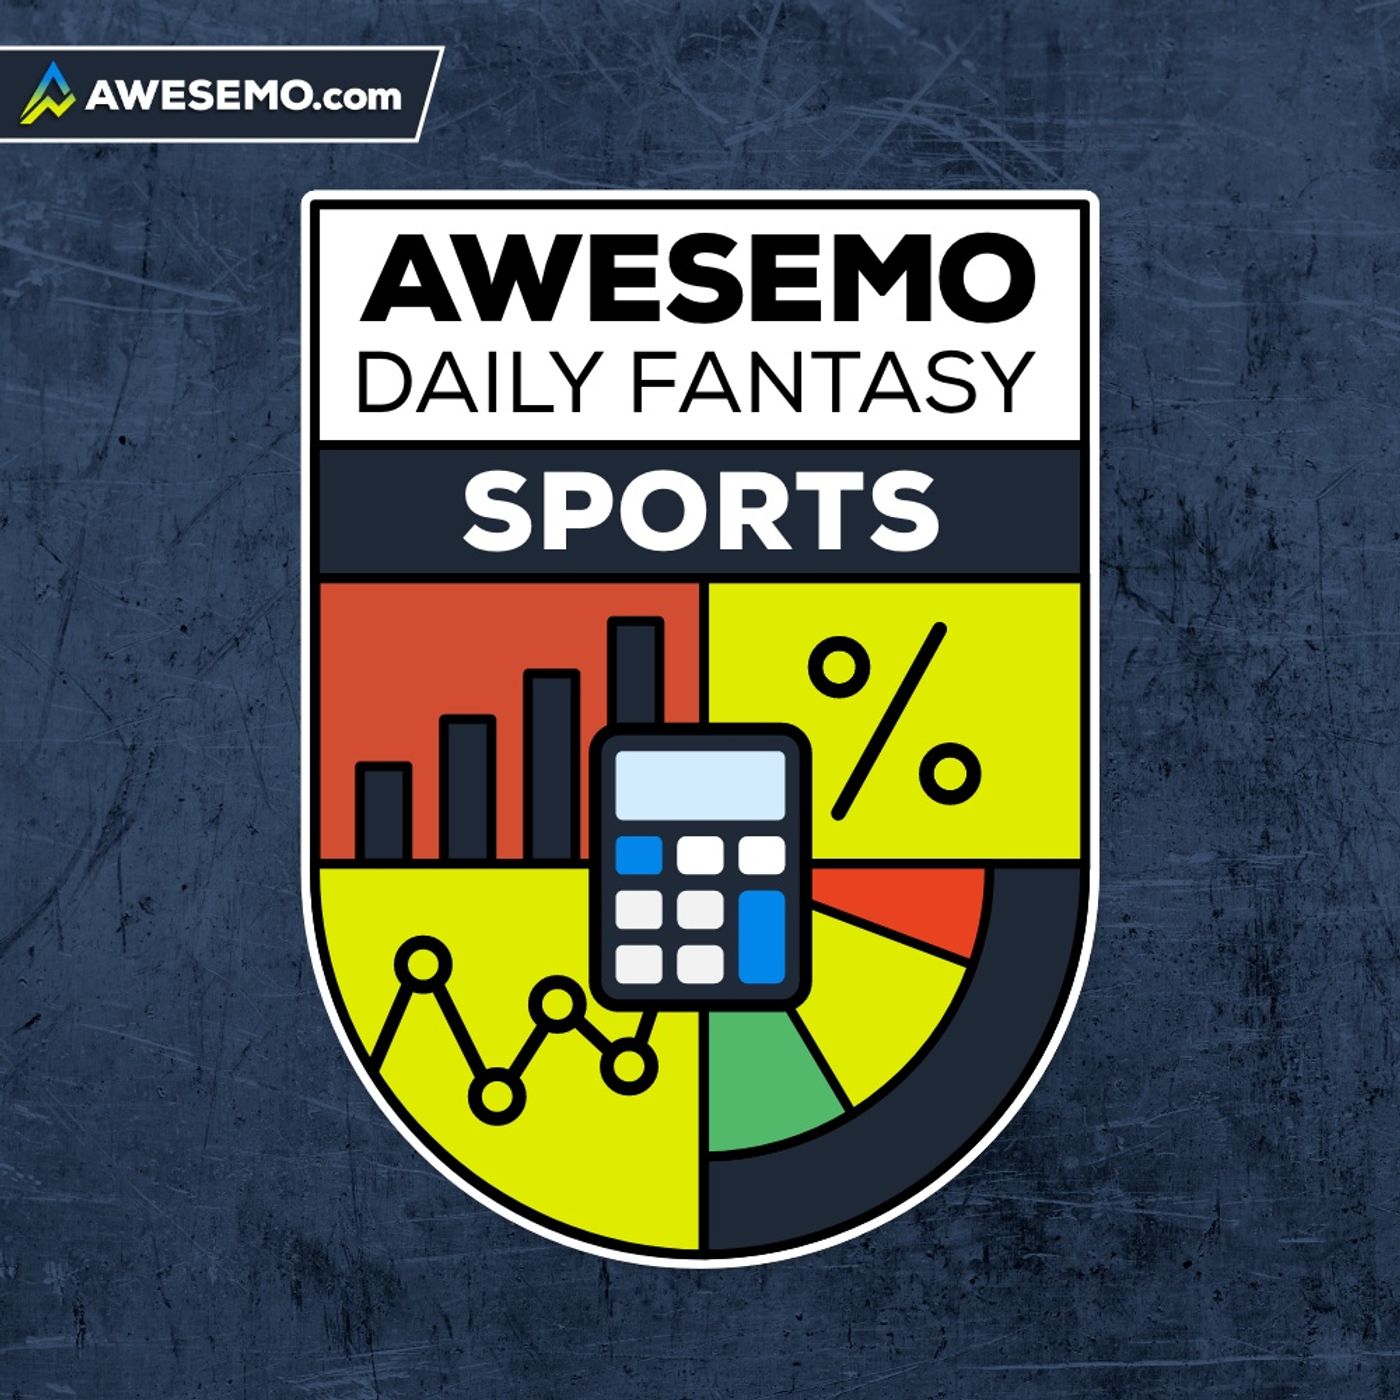 Awesemo.com – Fantasy Sports Advice from the #1 Player